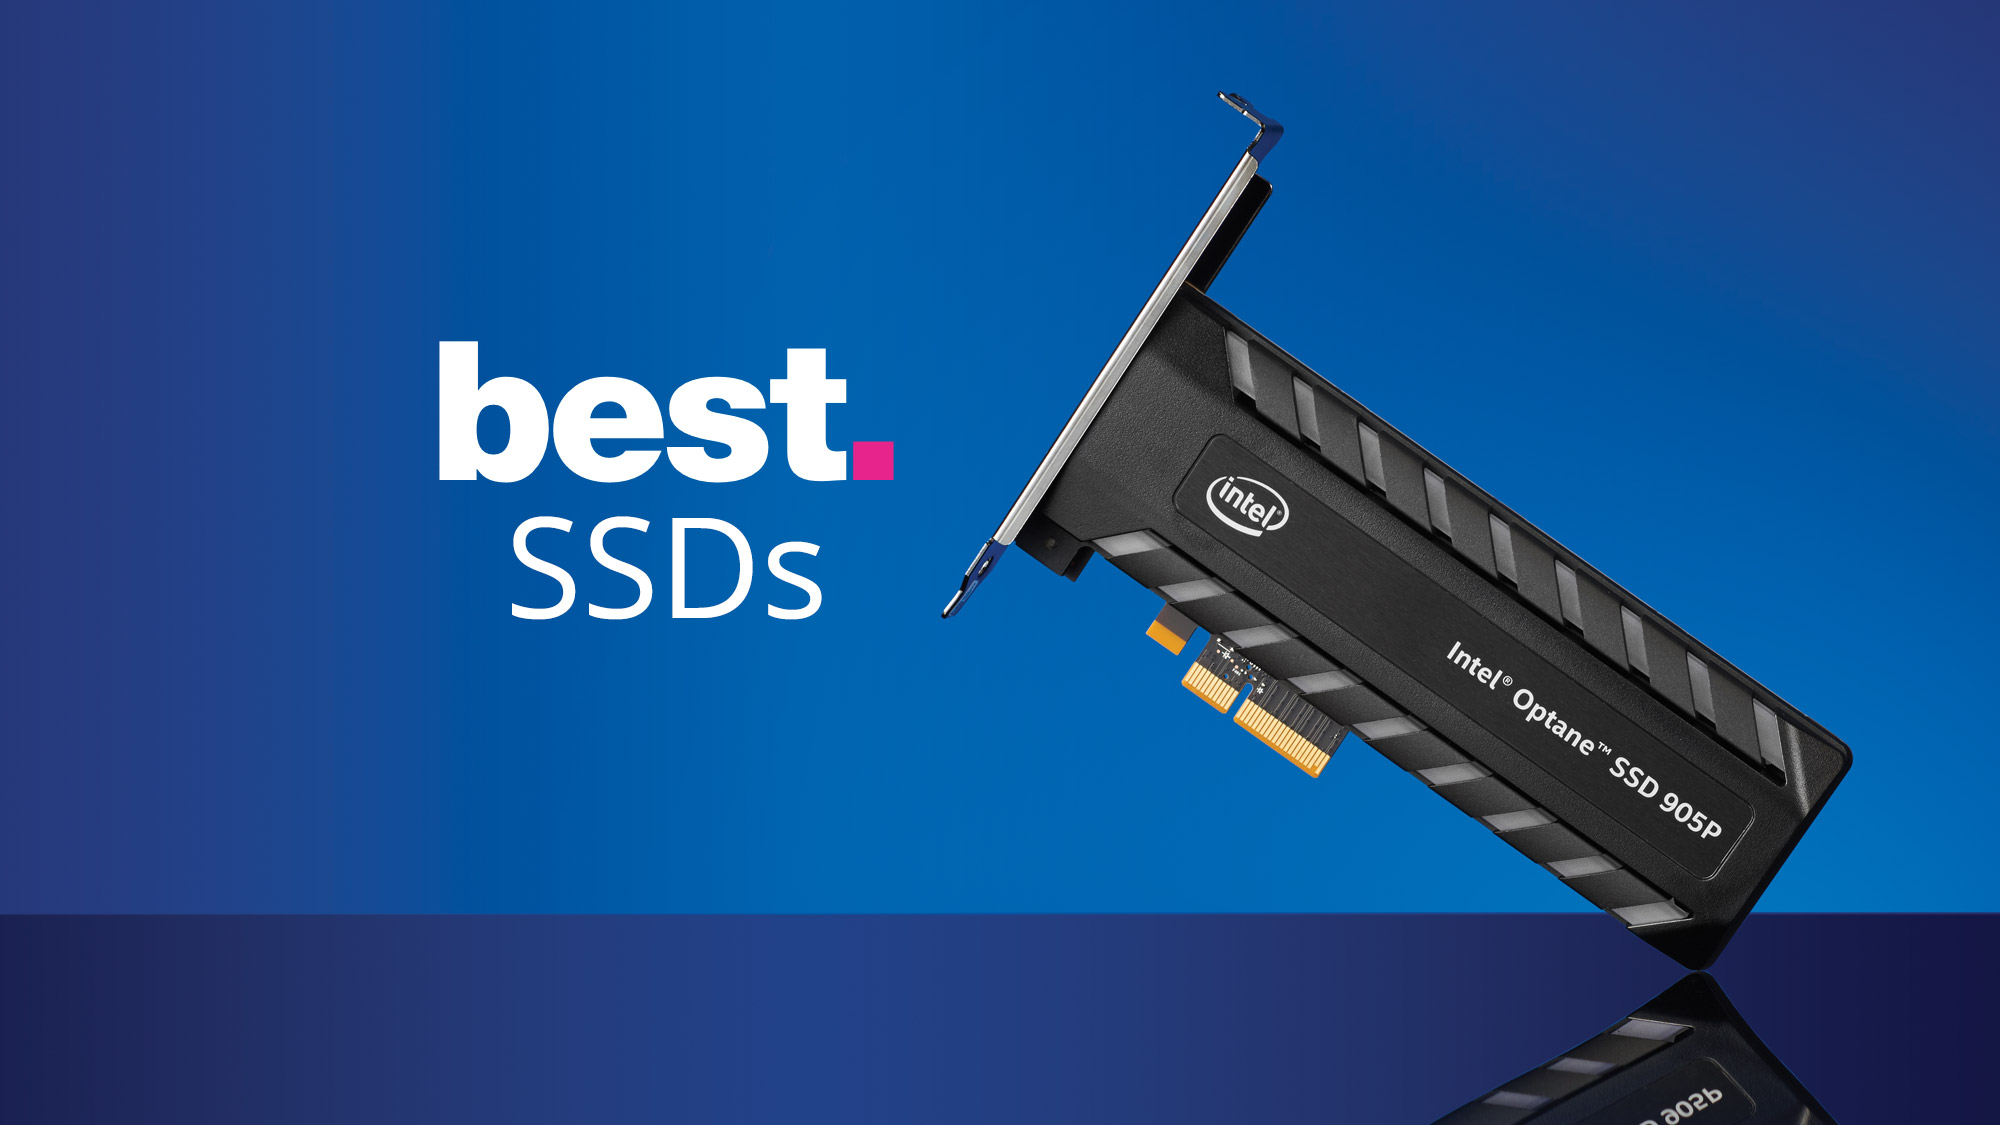 Faster Loading Means More Time for Pleasure: SSD 240GB